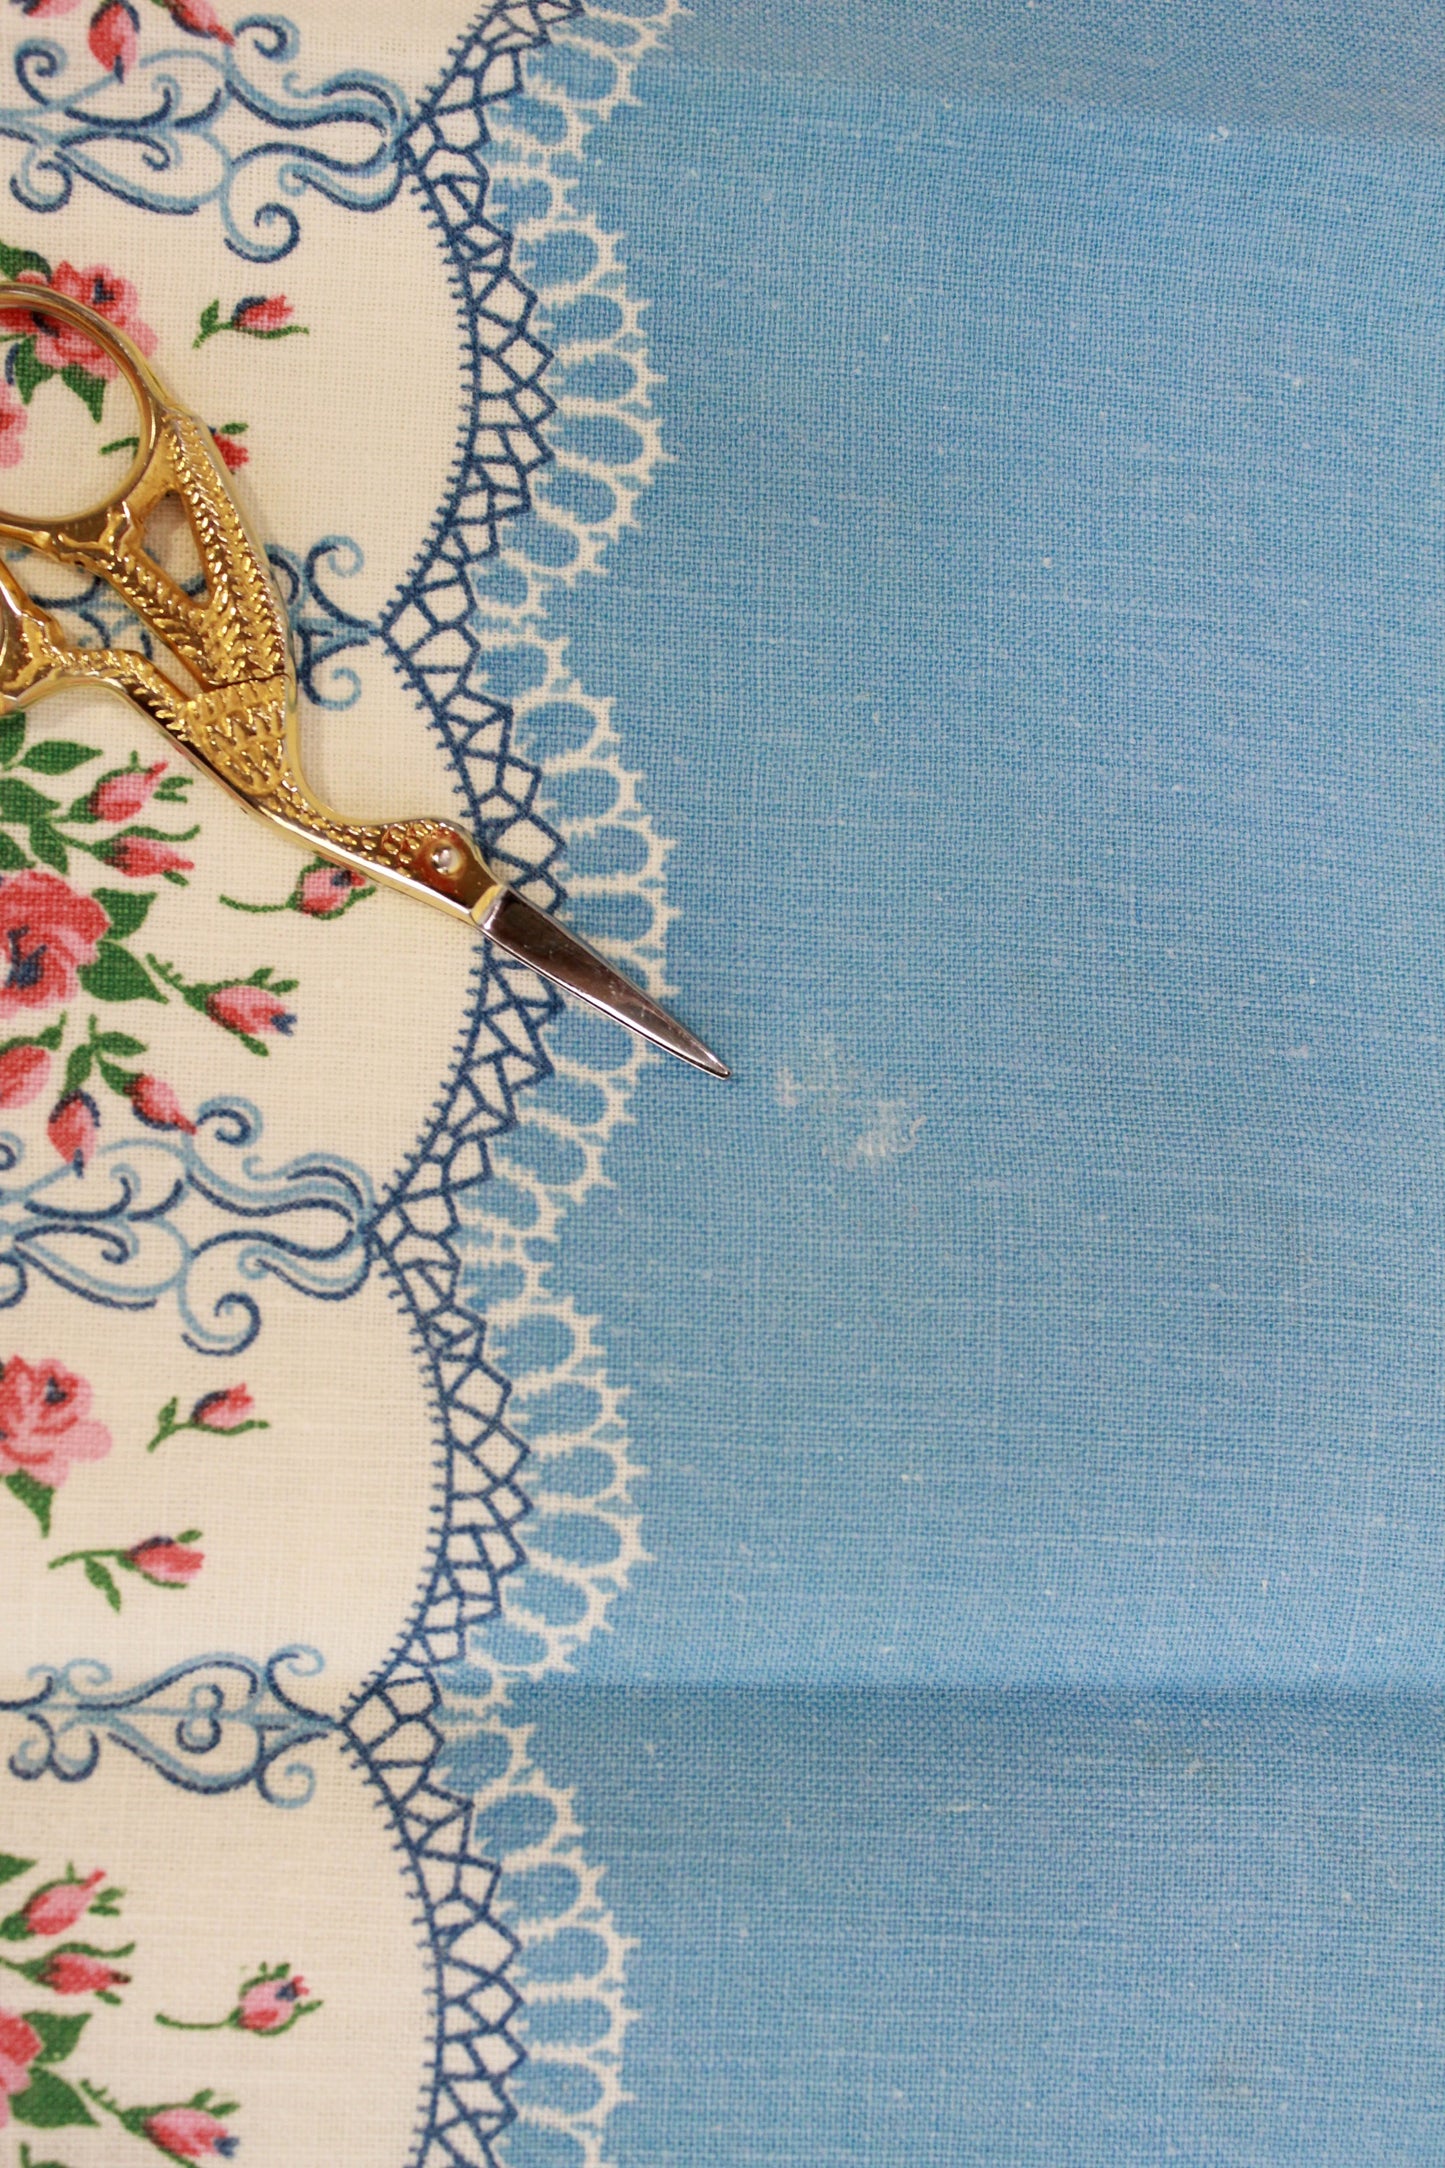 1940s Border Print Feedsack, Blue and Pink Flowers, Cotton Sewing Fabric